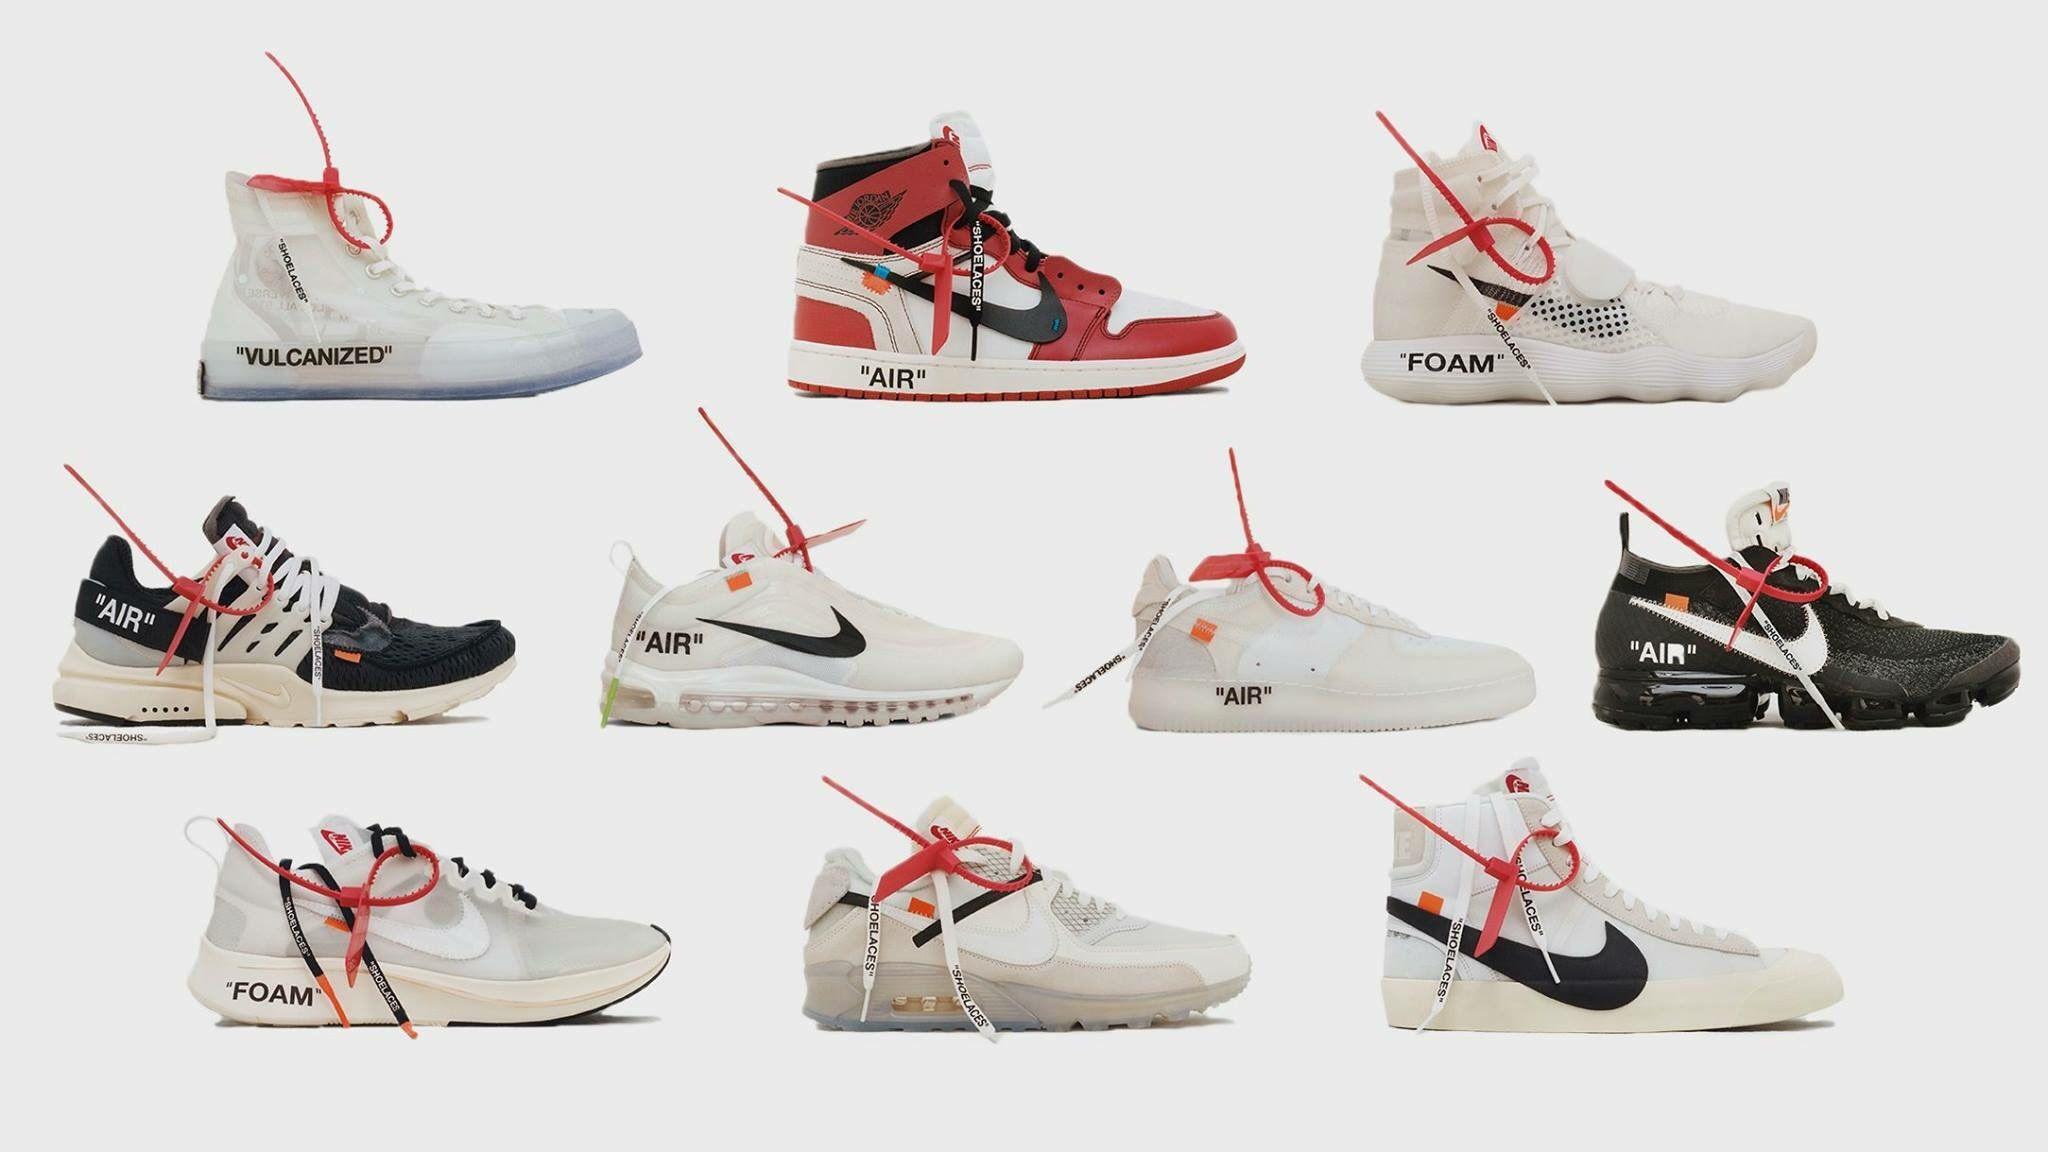 Nike X Off White Wallpapers